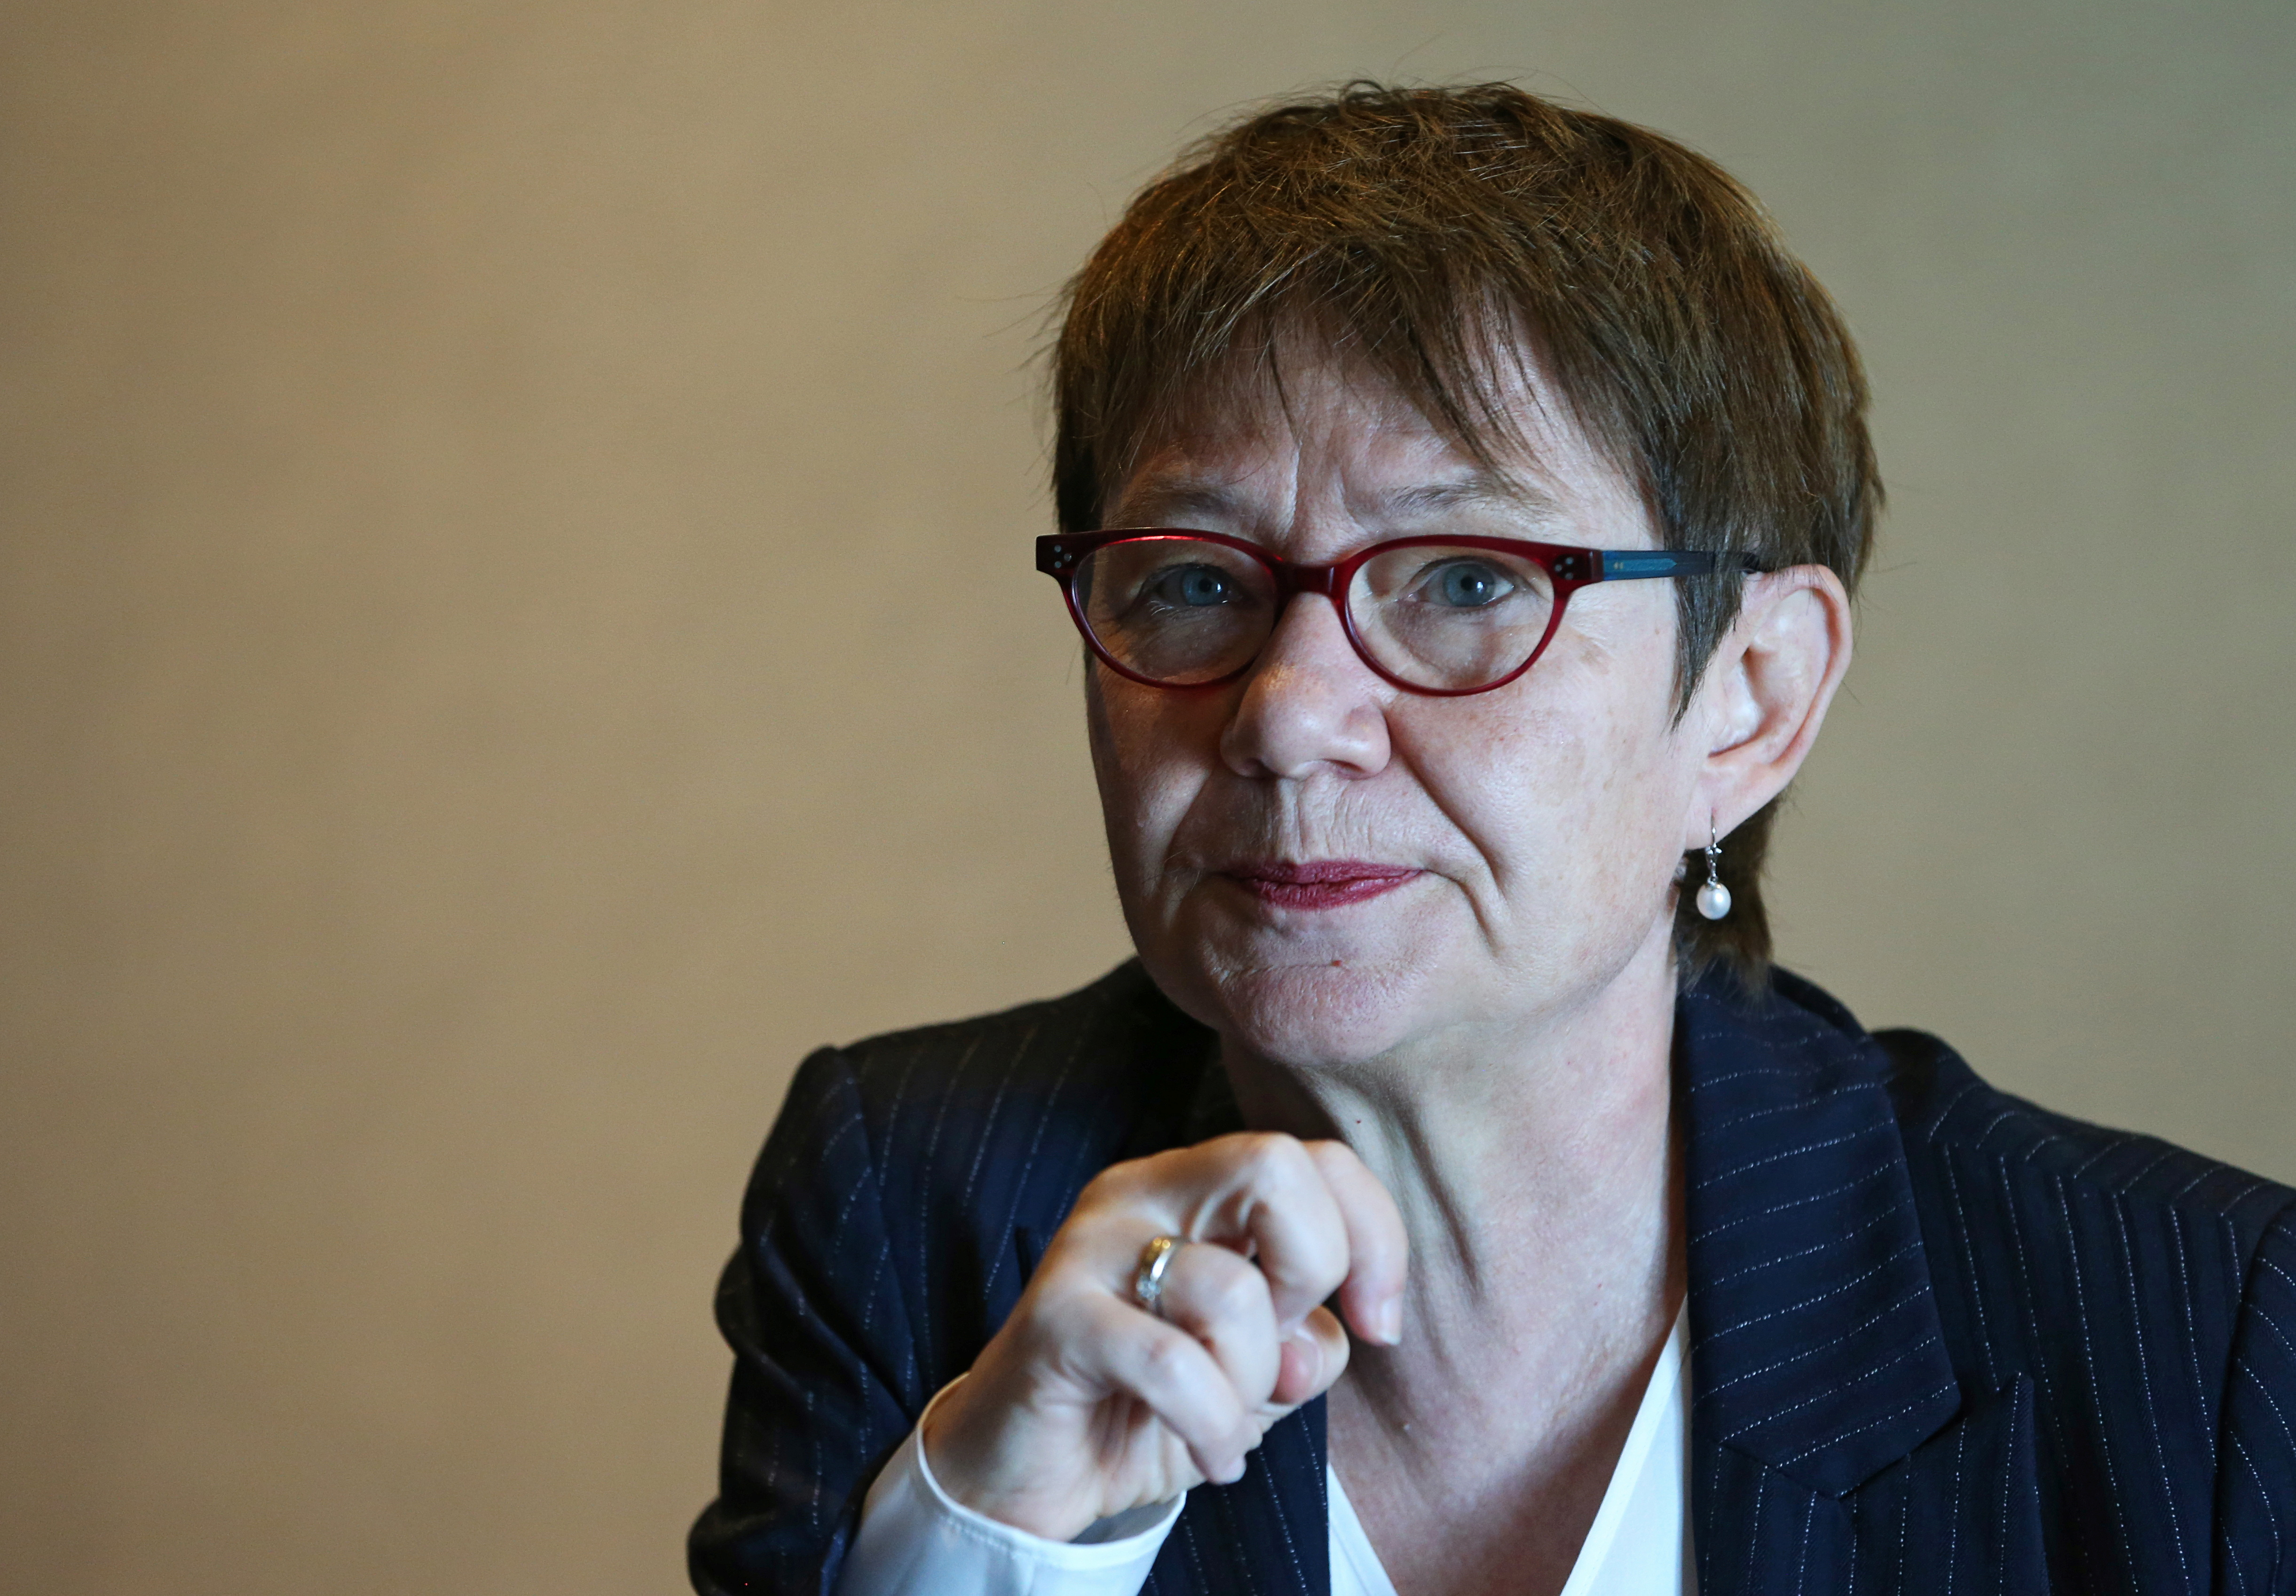 President of the European Bank for Reconstruction and Development Odile Renaud-Basso attends an interview in Almaty